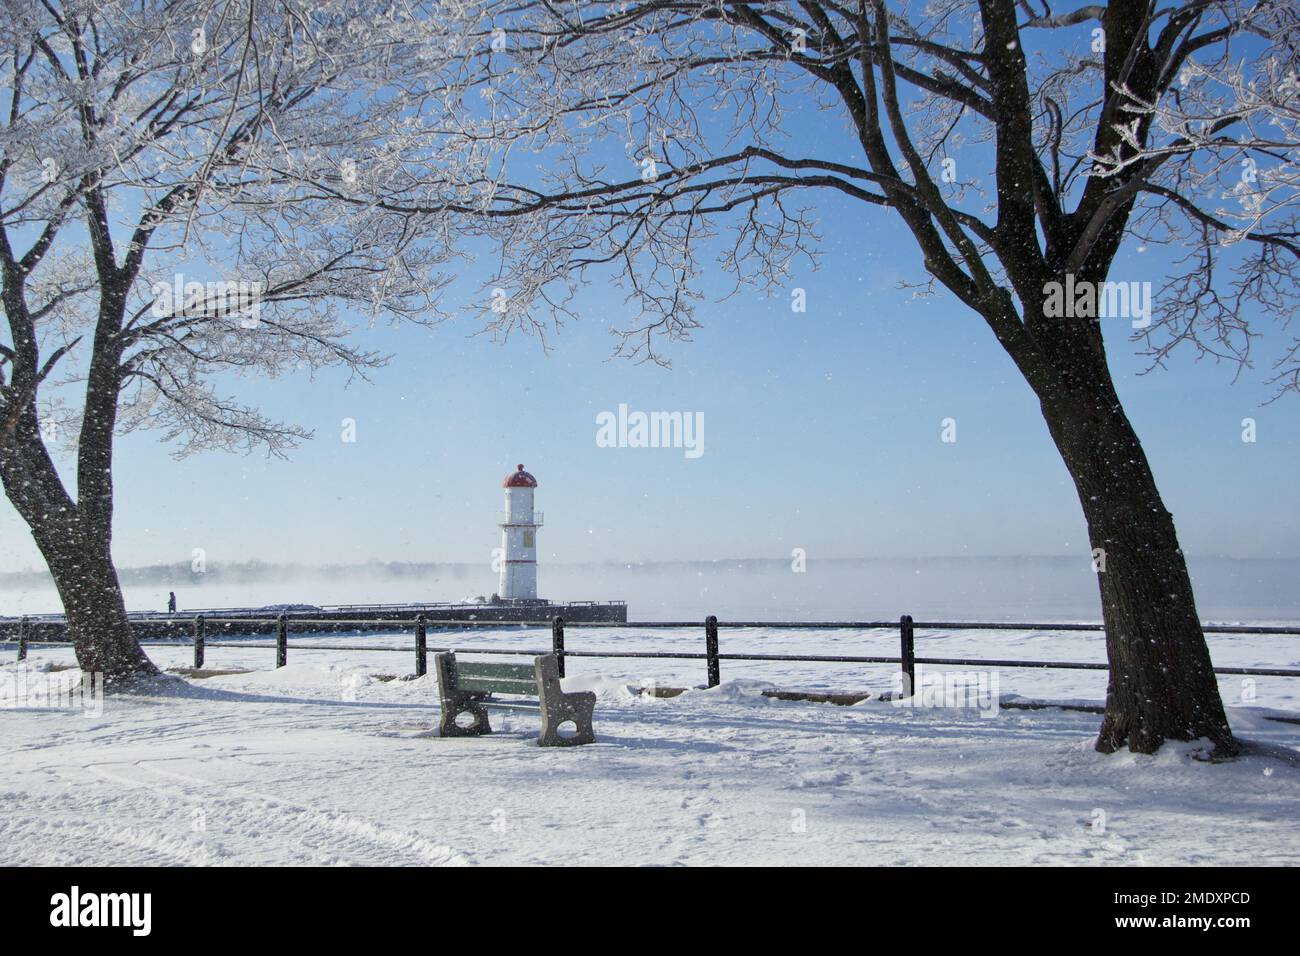 Cold and snowy day, Lachine, Montreal Stock Photo